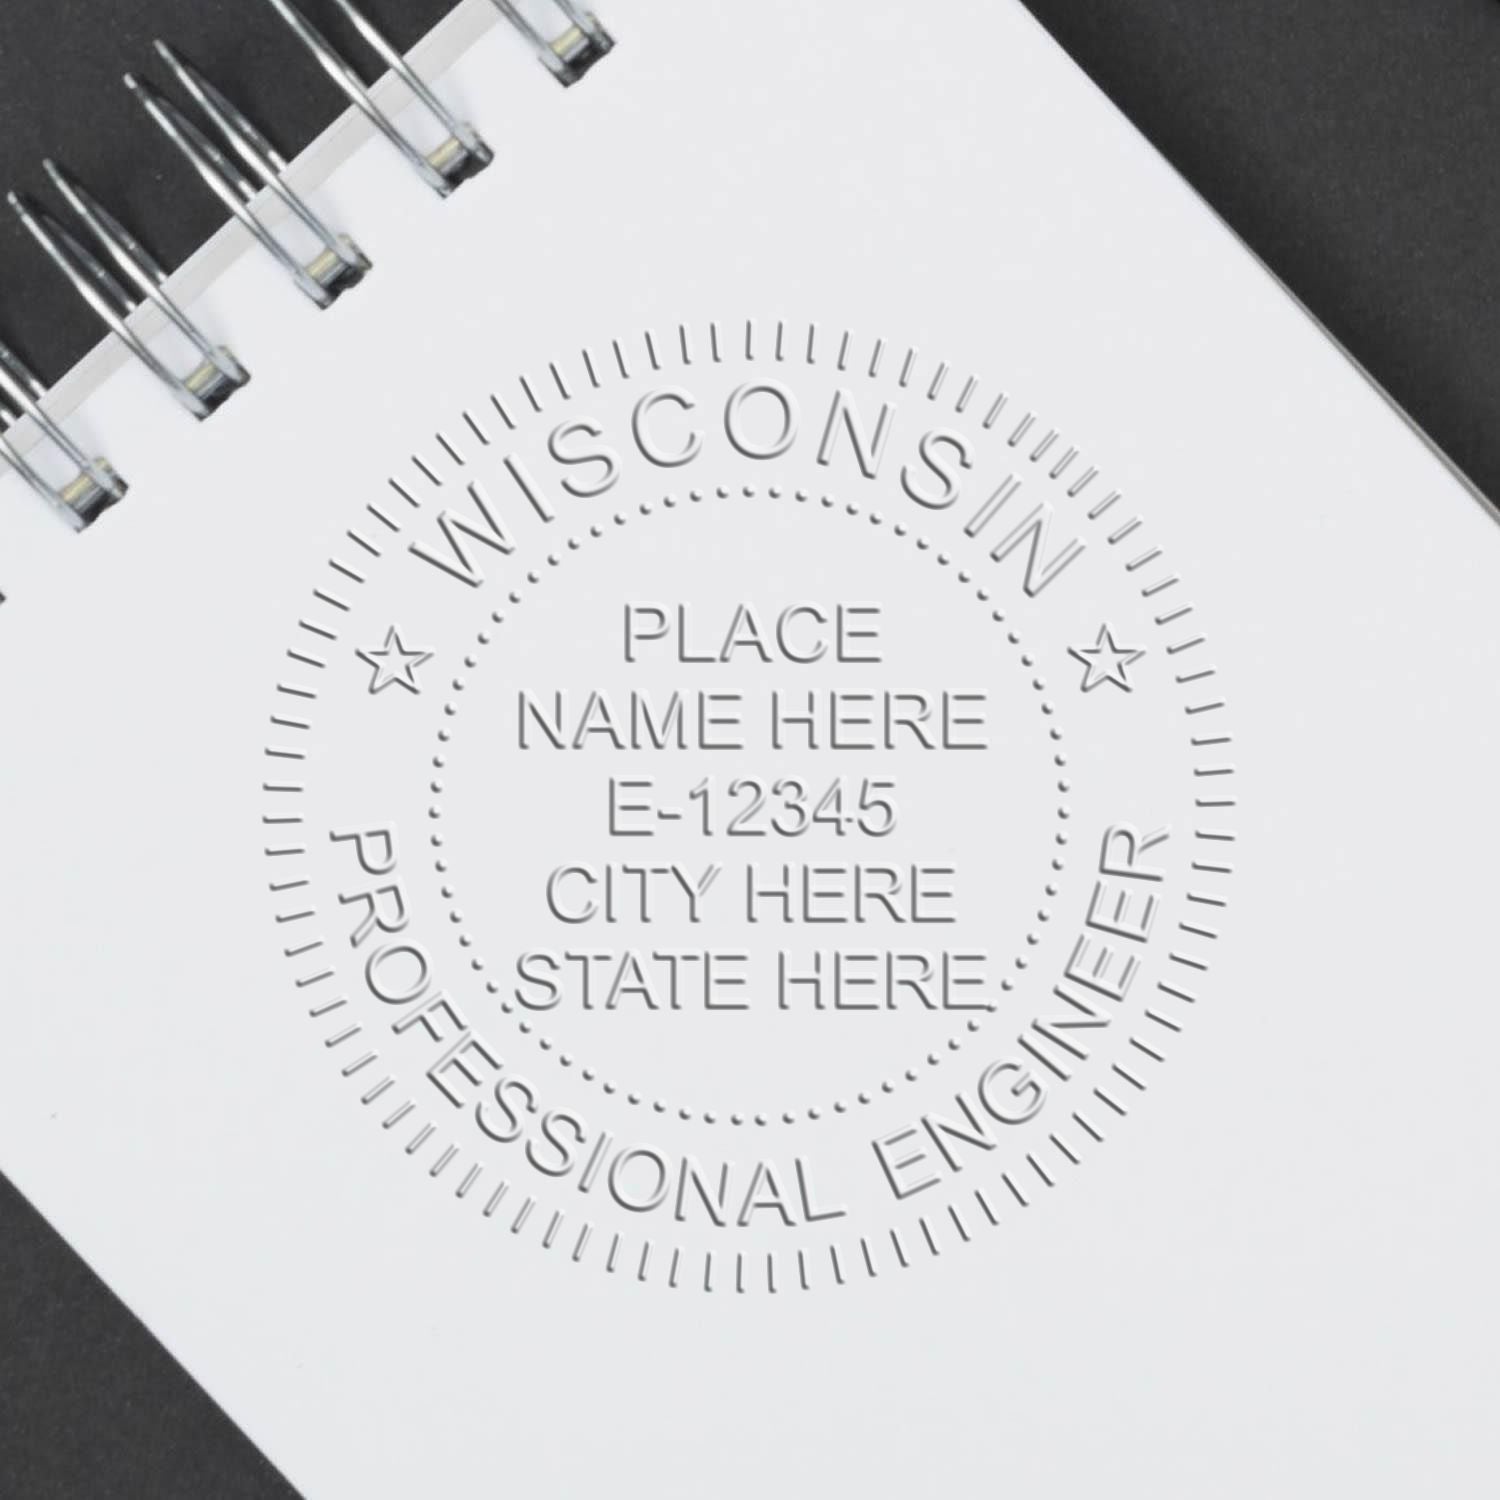 A stamped impression of the Soft Wisconsin Professional Engineer Seal in this stylish lifestyle photo, setting the tone for a unique and personalized product.